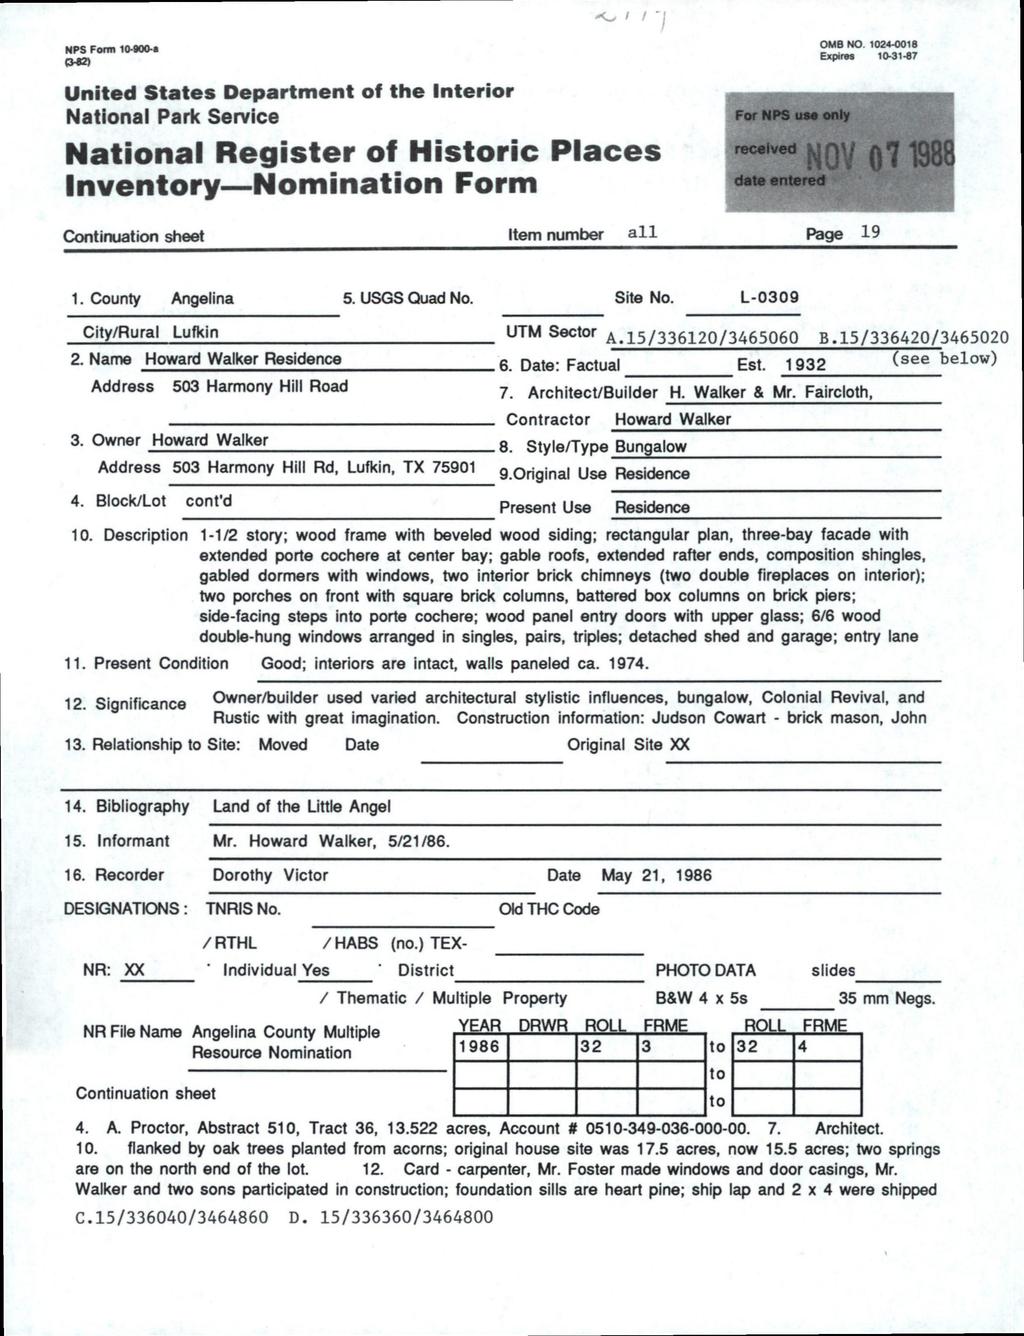 MPS Fonn 10-«00-a 04S) United States Department of the Interior National Park Service National Register of Historic Places Inventory Nomination Form Continuation sheet Item number all For HPS use